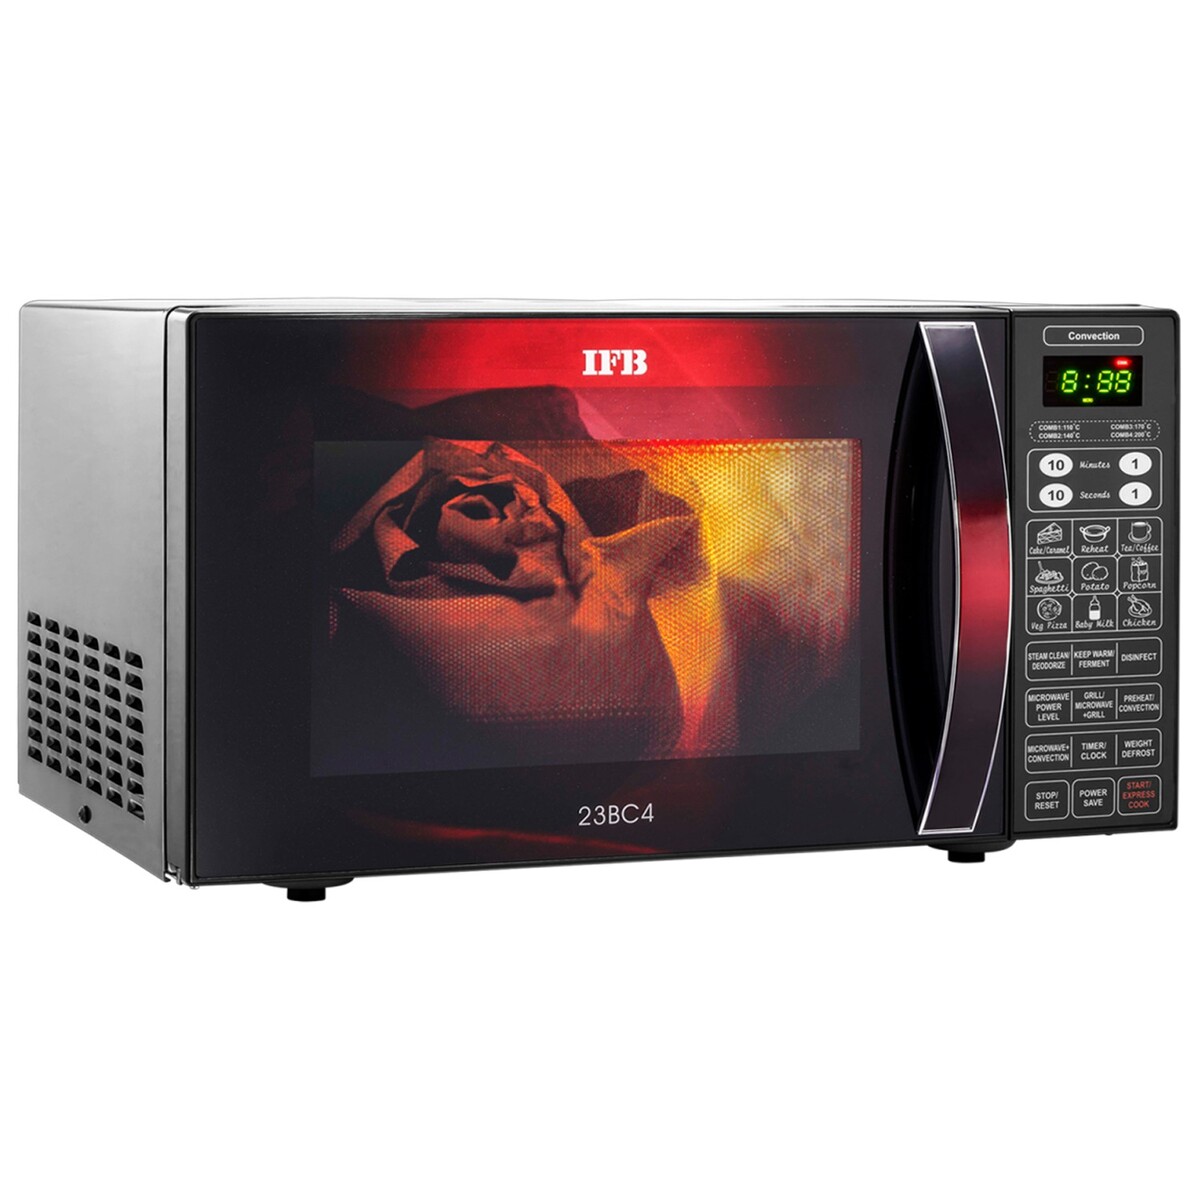 IFB Microwave Oven 23BC4 23 Litre